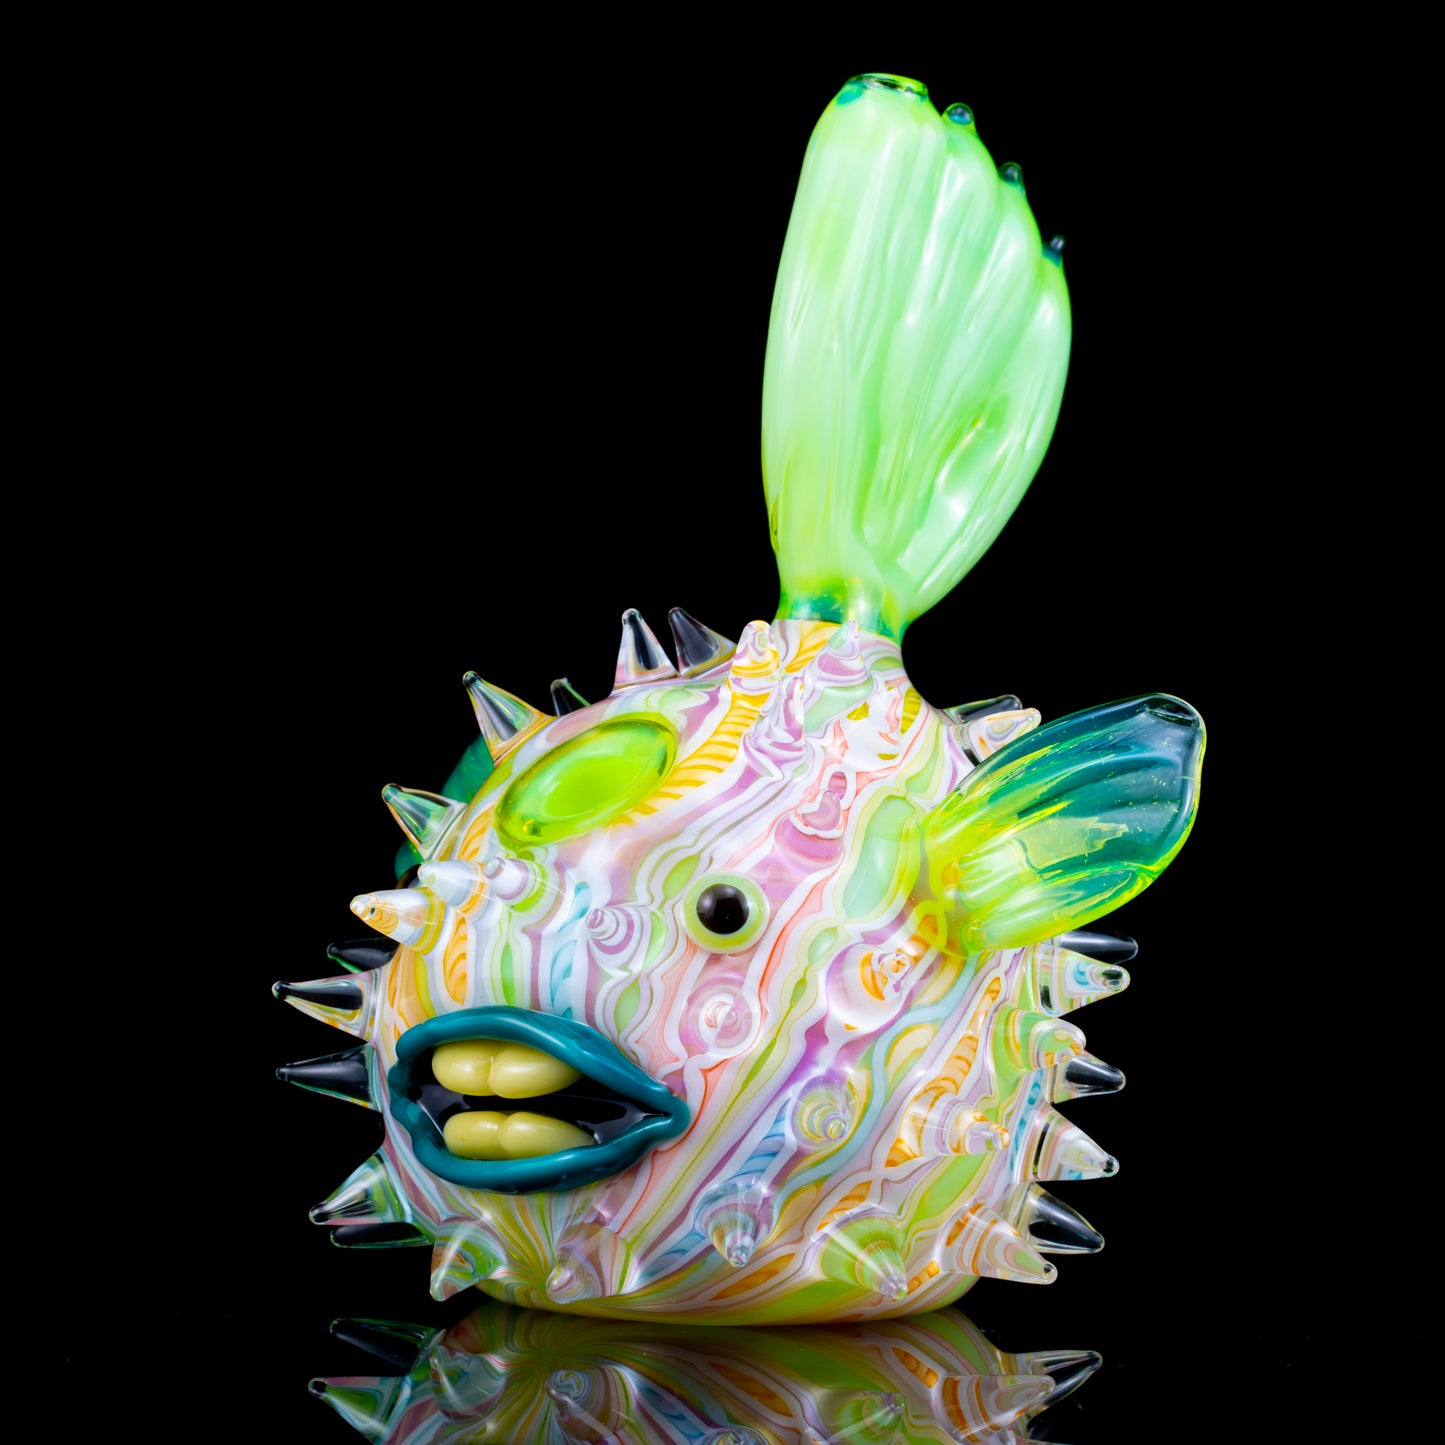 Pastel Puffer Rig by Chadd Lacy x Trip A (Coogi Zoo)